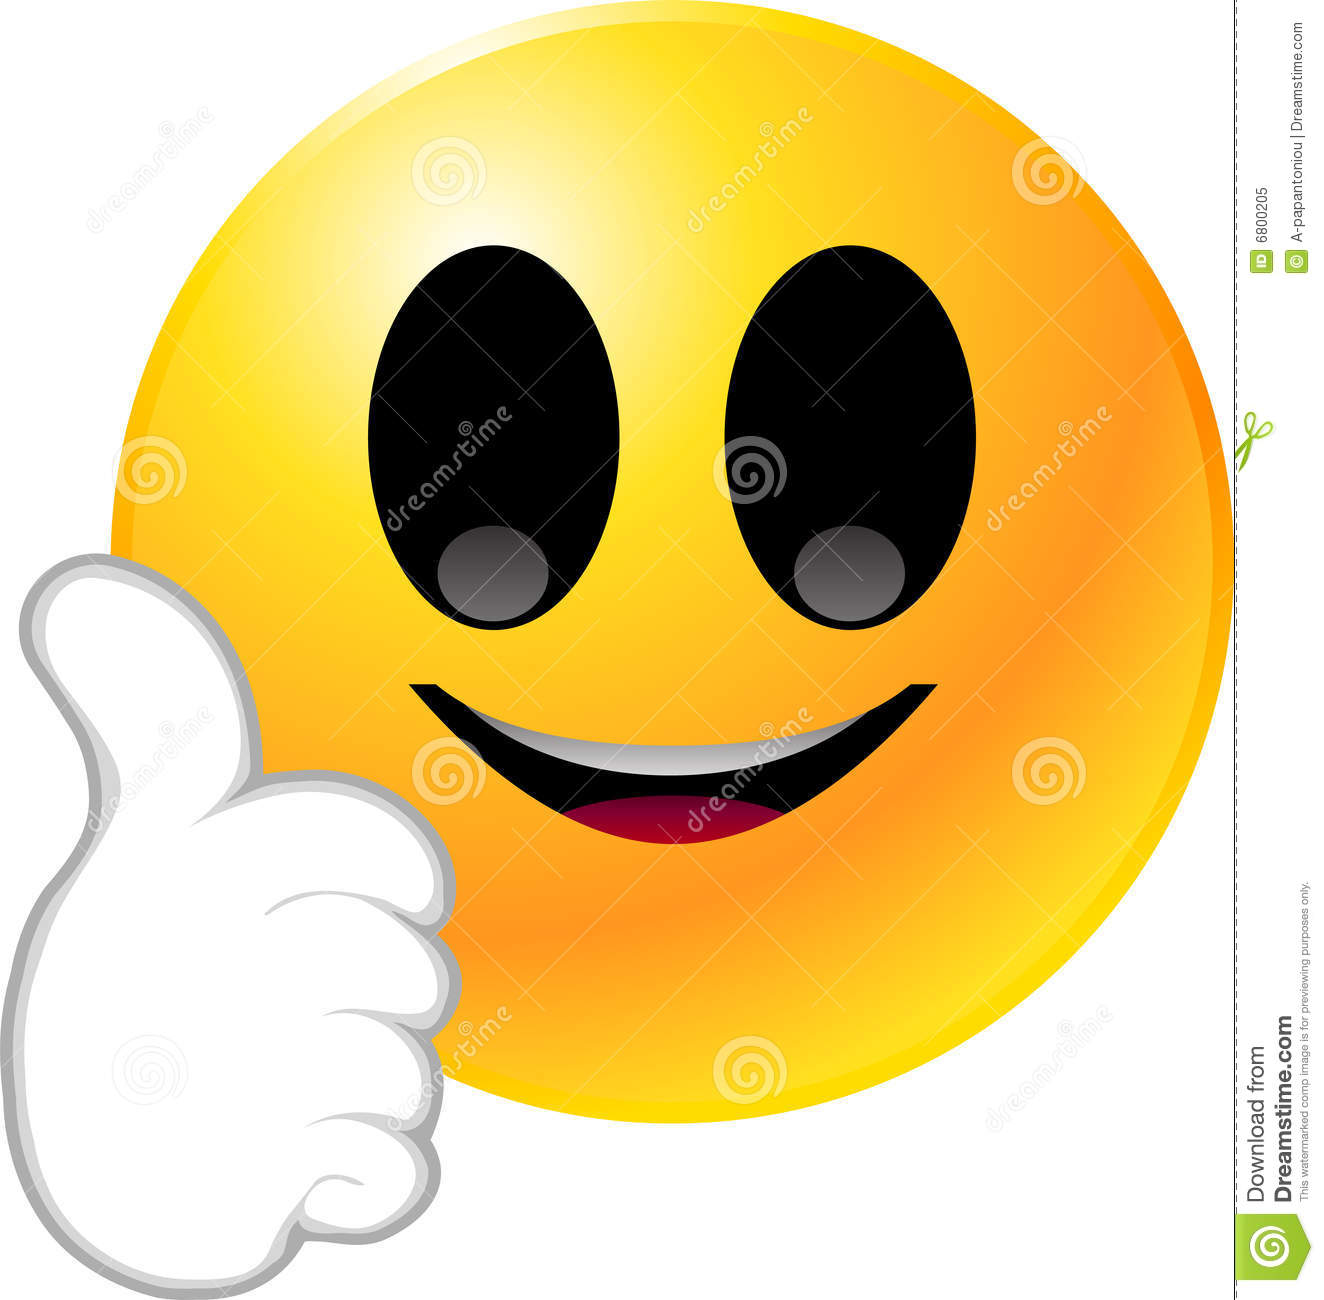 Smiley Face Thumbs Up Black And White Smiley Face Thumbs Up Clipart